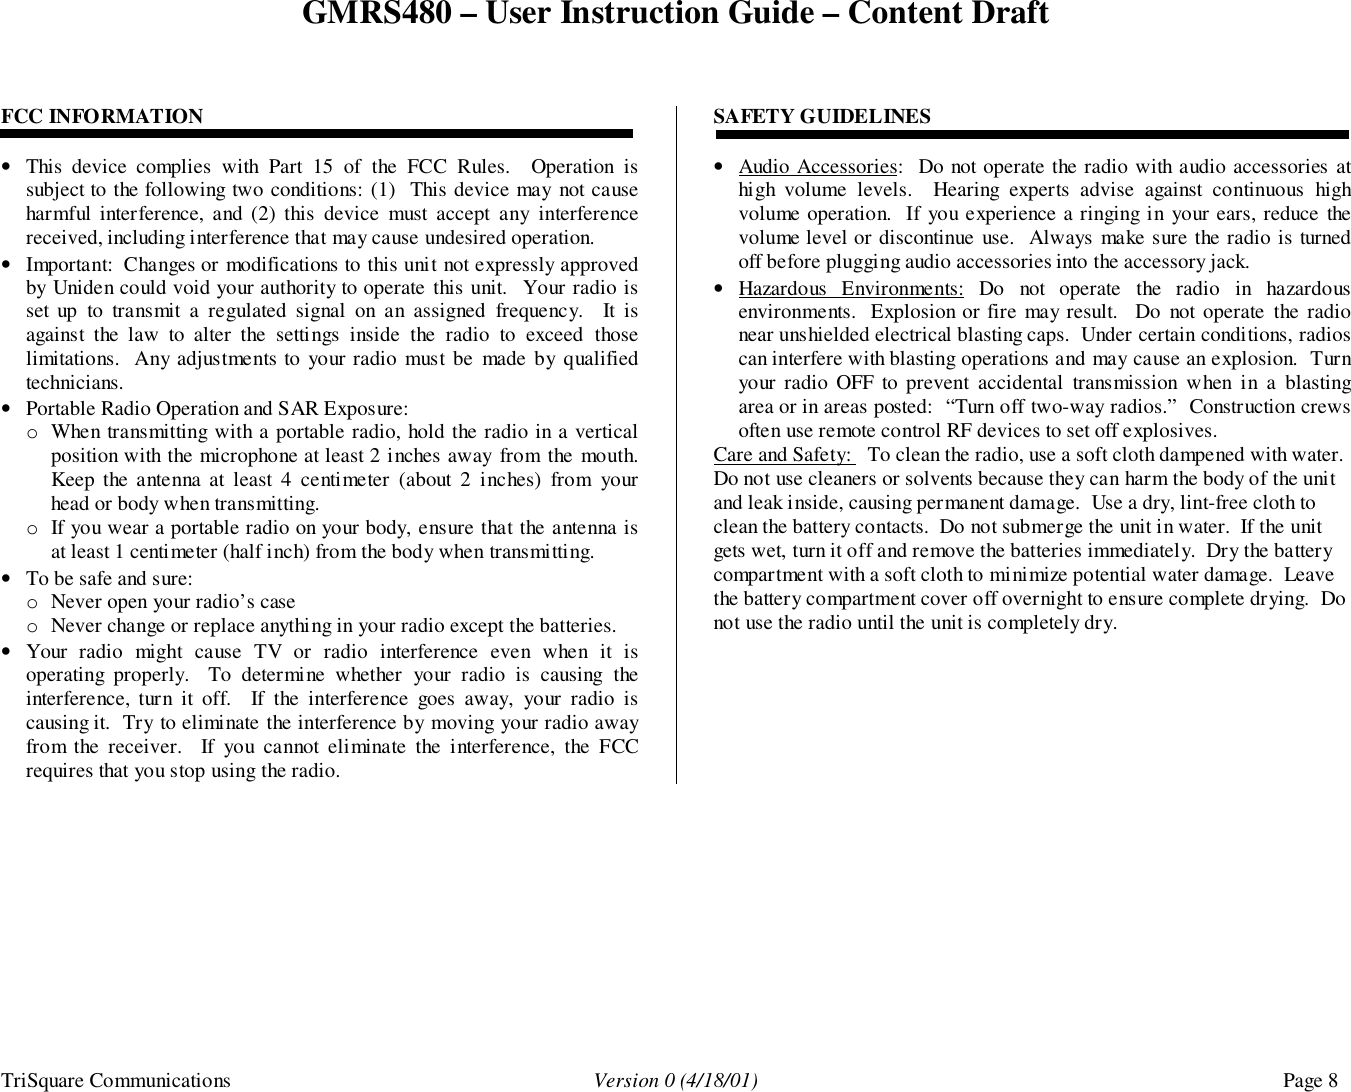 GMRS480 – User Instruction Guide – Content DraftTriSquare Communications Version 0 (4/18/01) Page 8FCC INFORMATION• This device complies with Part 15 of the FCC Rules.  Operation issubject to the following two conditions: (1)  This device may not causeharmful interference, and (2) this device must accept any interferencereceived, including interference that may cause undesired operation.• Important:  Changes or modifications to this unit not expressly approvedby Uniden could void your authority to operate this unit.  Your radio isset up to transmit a regulated signal on an assigned frequency.  It isagainst the law to alter the settings inside the radio to exceed thoselimitations.  Any adjustments to your radio must be made by qualifiedtechnicians.• Portable Radio Operation and SAR Exposure:o When transmitting with a portable radio, hold the radio in a verticalposition with the microphone at least 2 inches away from the mouth.Keep the antenna at least 4 centimeter (about 2 inches) from yourhead or body when transmitting.o If you wear a portable radio on your body, ensure that the antenna isat least 1 centimeter (half inch) from the body when transmitting.• To be safe and sure:o Never open your radio’s caseo Never change or replace anything in your radio except the batteries.• Your radio might cause TV or radio interference even when it isoperating properly.  To determine whether your radio is causing theinterference, turn it off.  If the interference goes away, your radio iscausing it.  Try to eliminate the interference by moving your radio awayfrom the receiver.  If you cannot eliminate the interference, the FCCrequires that you stop using the radio.SAFETY GUIDELINES• Audio Accessories:  Do not operate the radio with audio accessories athigh volume levels.  Hearing experts advise against continuous highvolume operation.  If you experience a ringing in your ears, reduce thevolume level or discontinue use.  Always make sure the radio is turnedoff before plugging audio accessories into the accessory jack.• Hazardous Environments: Do not operate the radio in hazardousenvironments.  Explosion or fire may result.  Do not operate the radionear unshielded electrical blasting caps.  Under certain conditions, radioscan interfere with blasting operations and may cause an explosion.  Turnyour radio OFF to prevent accidental transmission when in a blastingarea or in areas posted:  “Turn off two-way radios.”  Construction crewsoften use remote control RF devices to set off explosives.Care and Safety:   To clean the radio, use a soft cloth dampened with water.Do not use cleaners or solvents because they can harm the body of the unitand leak inside, causing permanent damage.  Use a dry, lint-free cloth toclean the battery contacts.  Do not submerge the unit in water.  If the unitgets wet, turn it off and remove the batteries immediately.  Dry the batterycompartment with a soft cloth to minimize potential water damage.  Leavethe battery compartment cover off overnight to ensure complete drying.  Donot use the radio until the unit is completely dry.